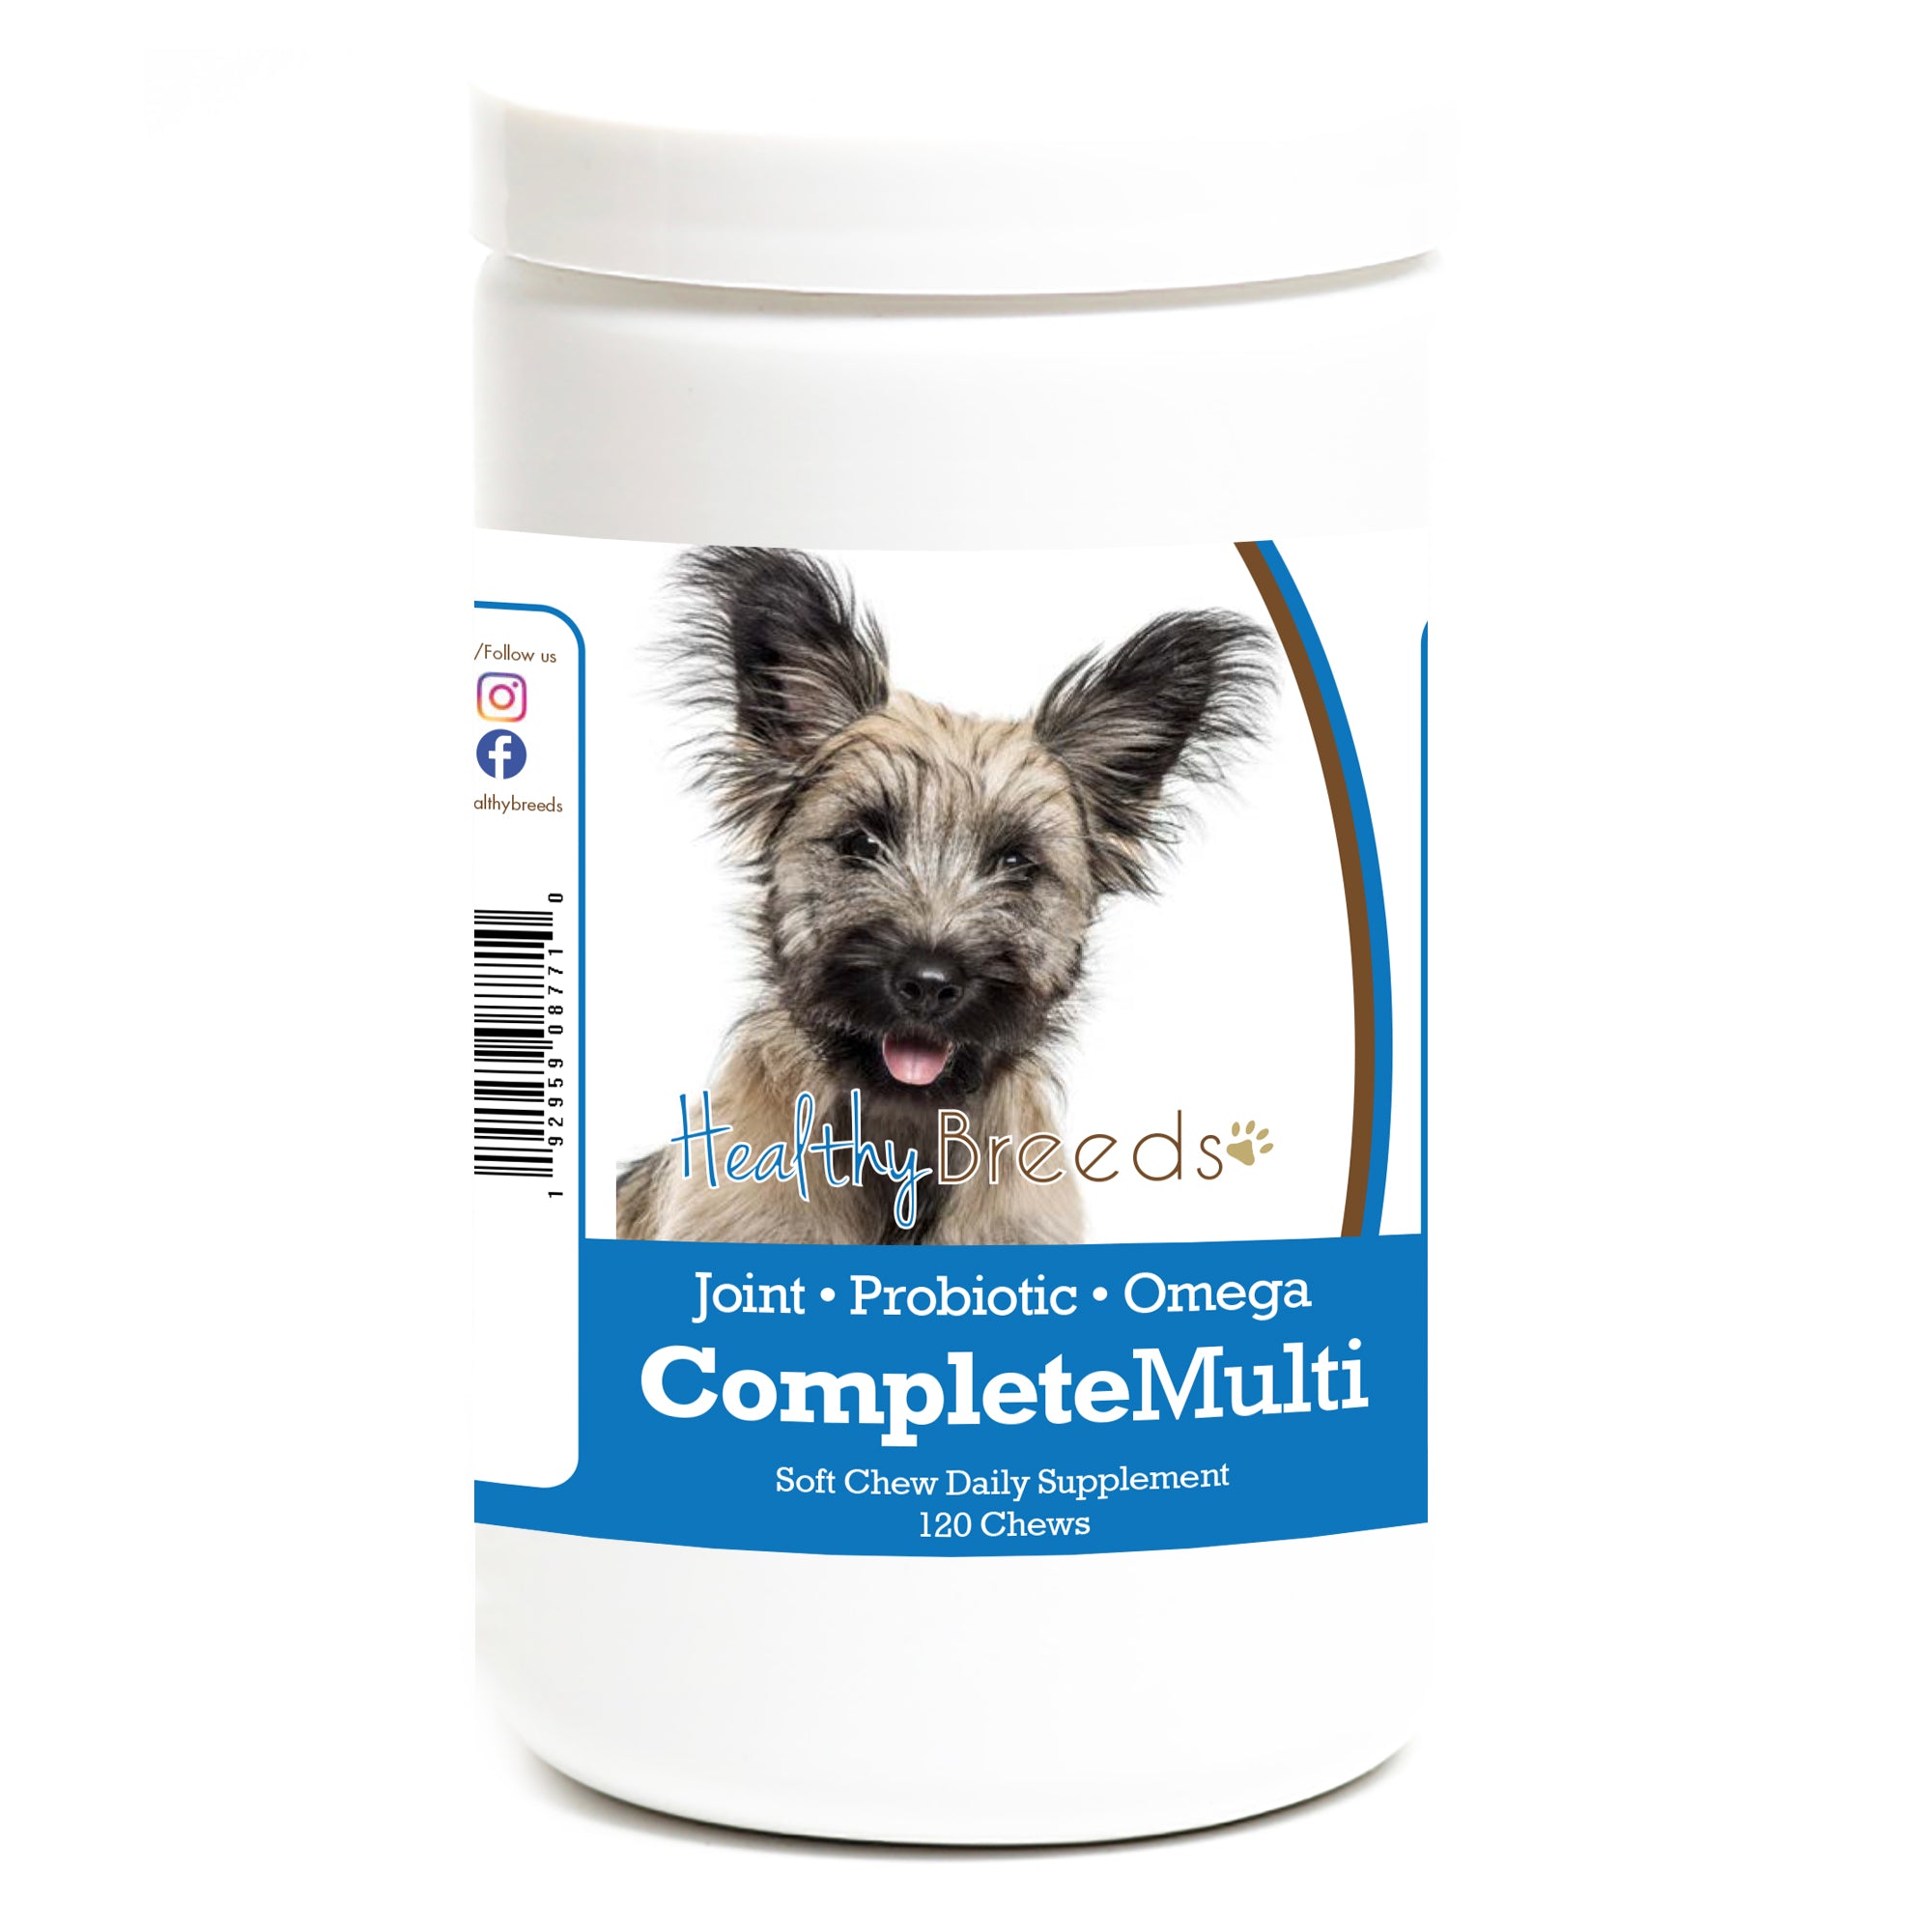 Skye Terrier All In One Multivitamin Soft Chew 120 Count